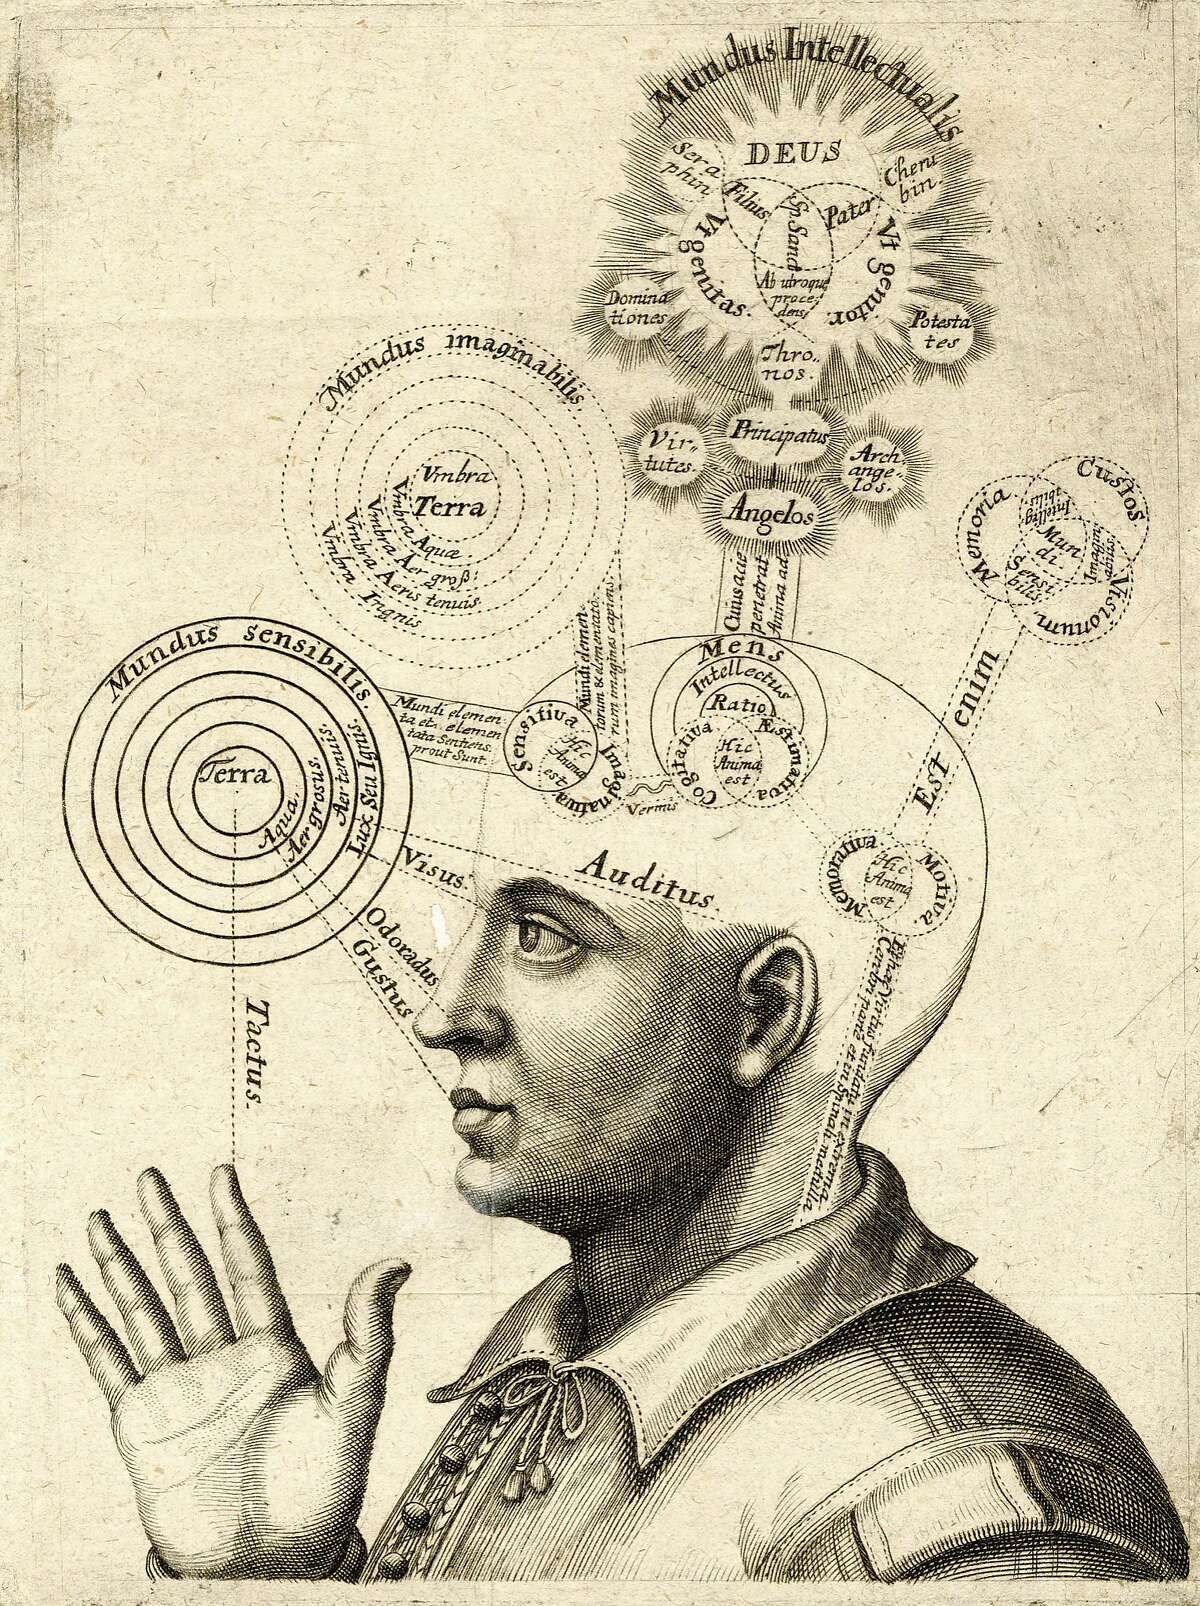 A print of the areas of the brain responsible for human thought, including the four senses, imagination, intellect and faith in God, circa 1650. Antique print of a man's head representing the areas of the brain responsible for human thought, including the four senses, imagination, intellect, and faith in God (copper engraving), c 1650. (Photo by GraphicaArtis/Getty Images)